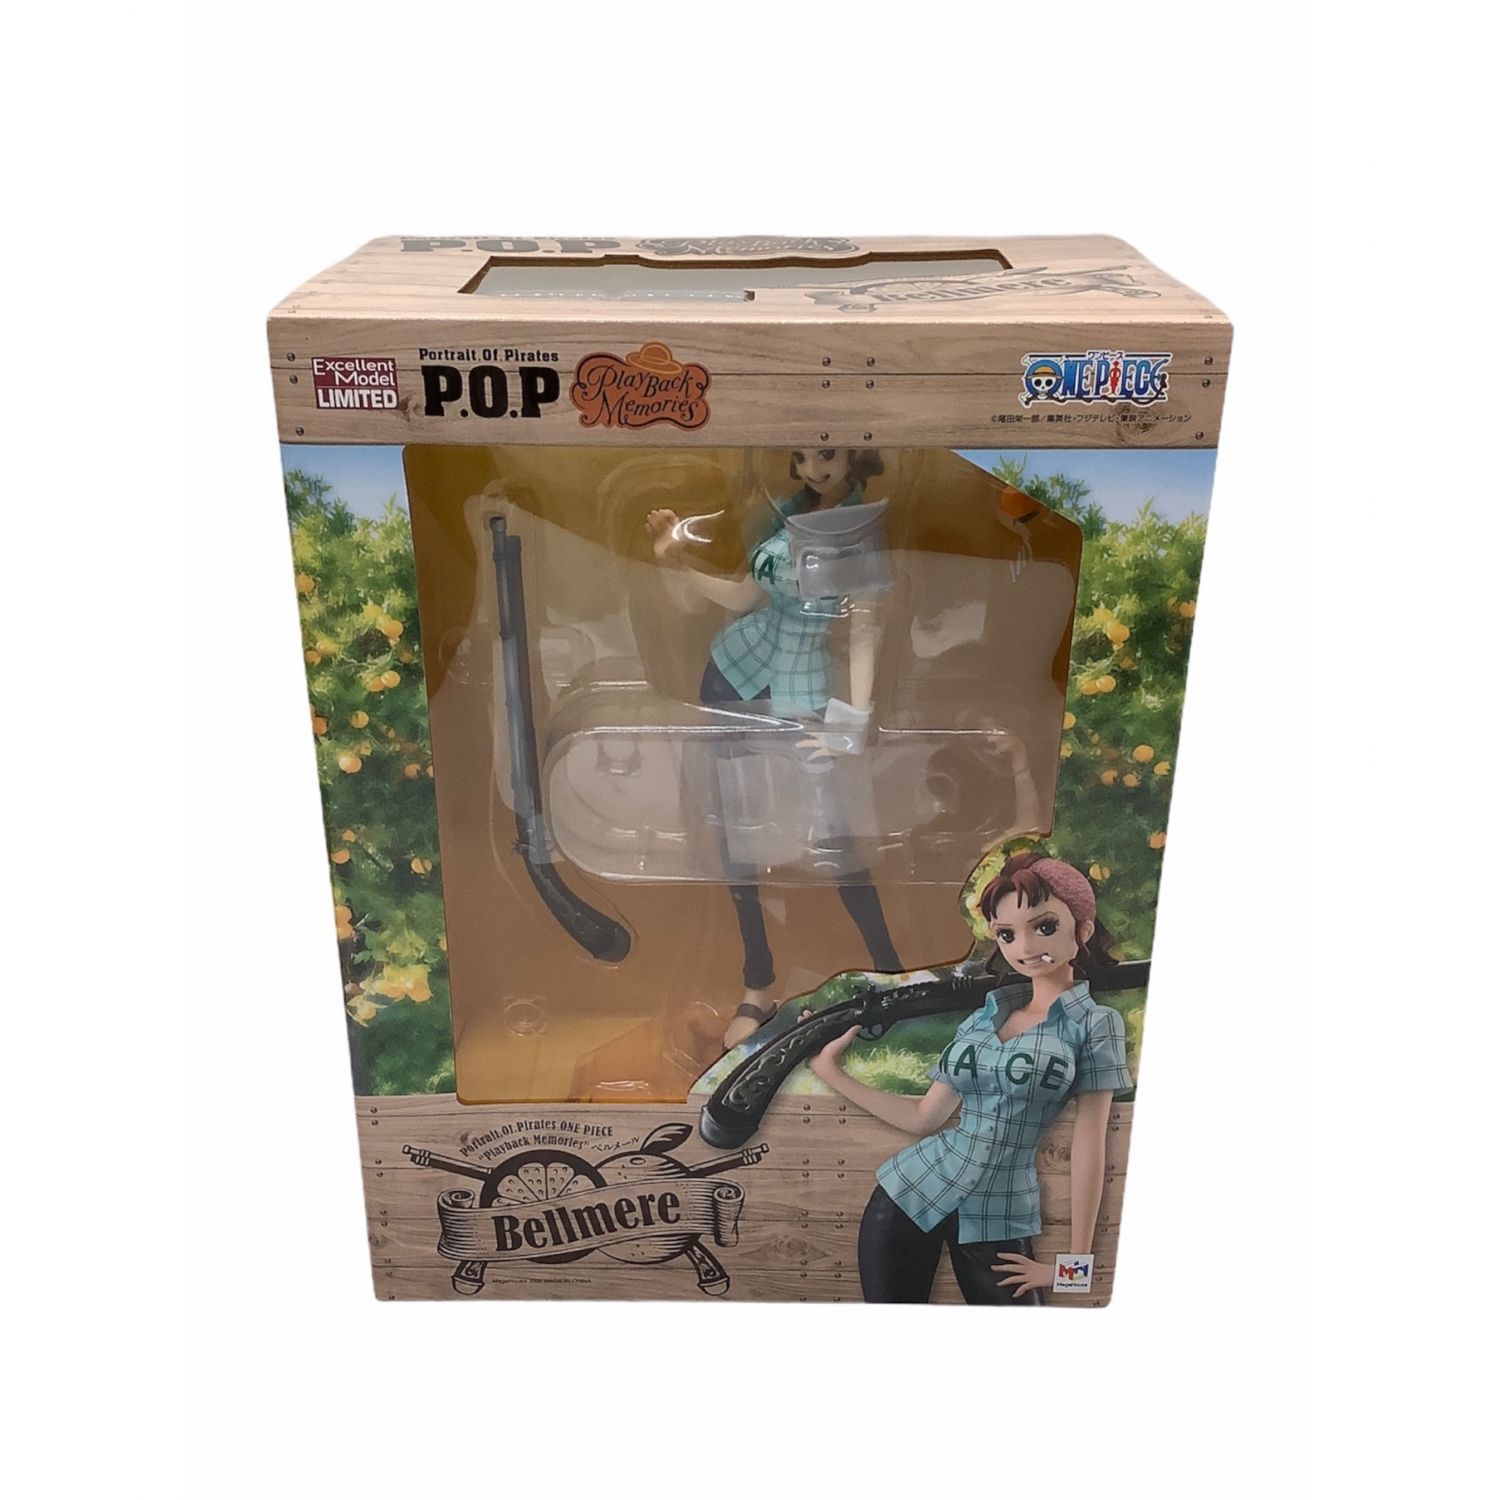 Megahouse メガハウス ベルメール One Piece Pop Playback Memories トレファクonline